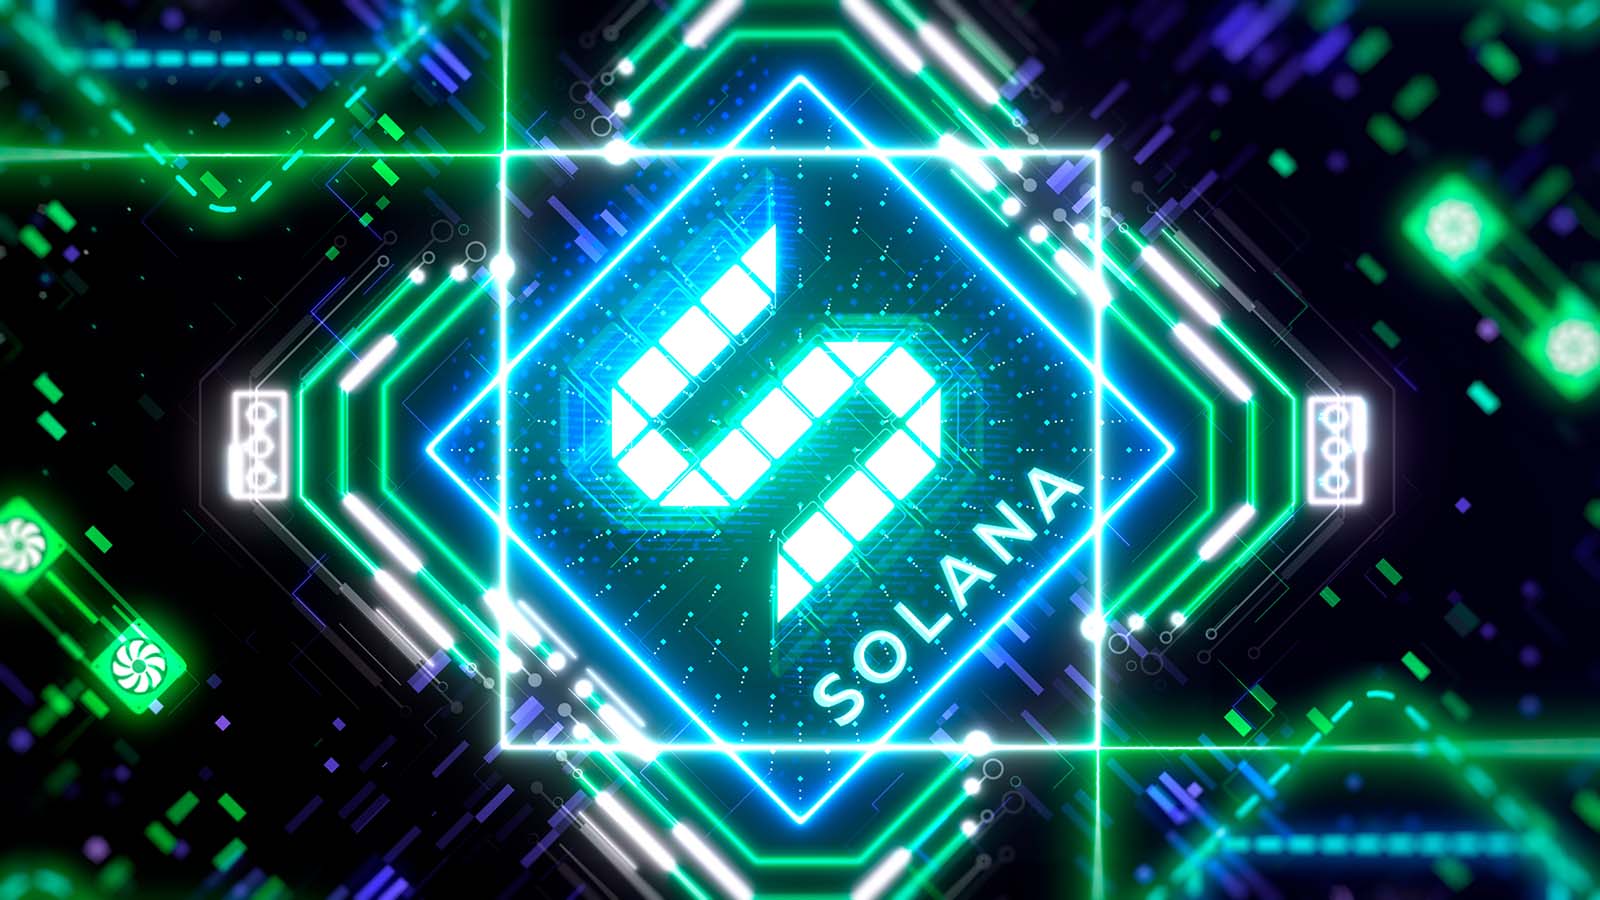 Solana – a Bitcoin rival – will hit new all-time highs this year